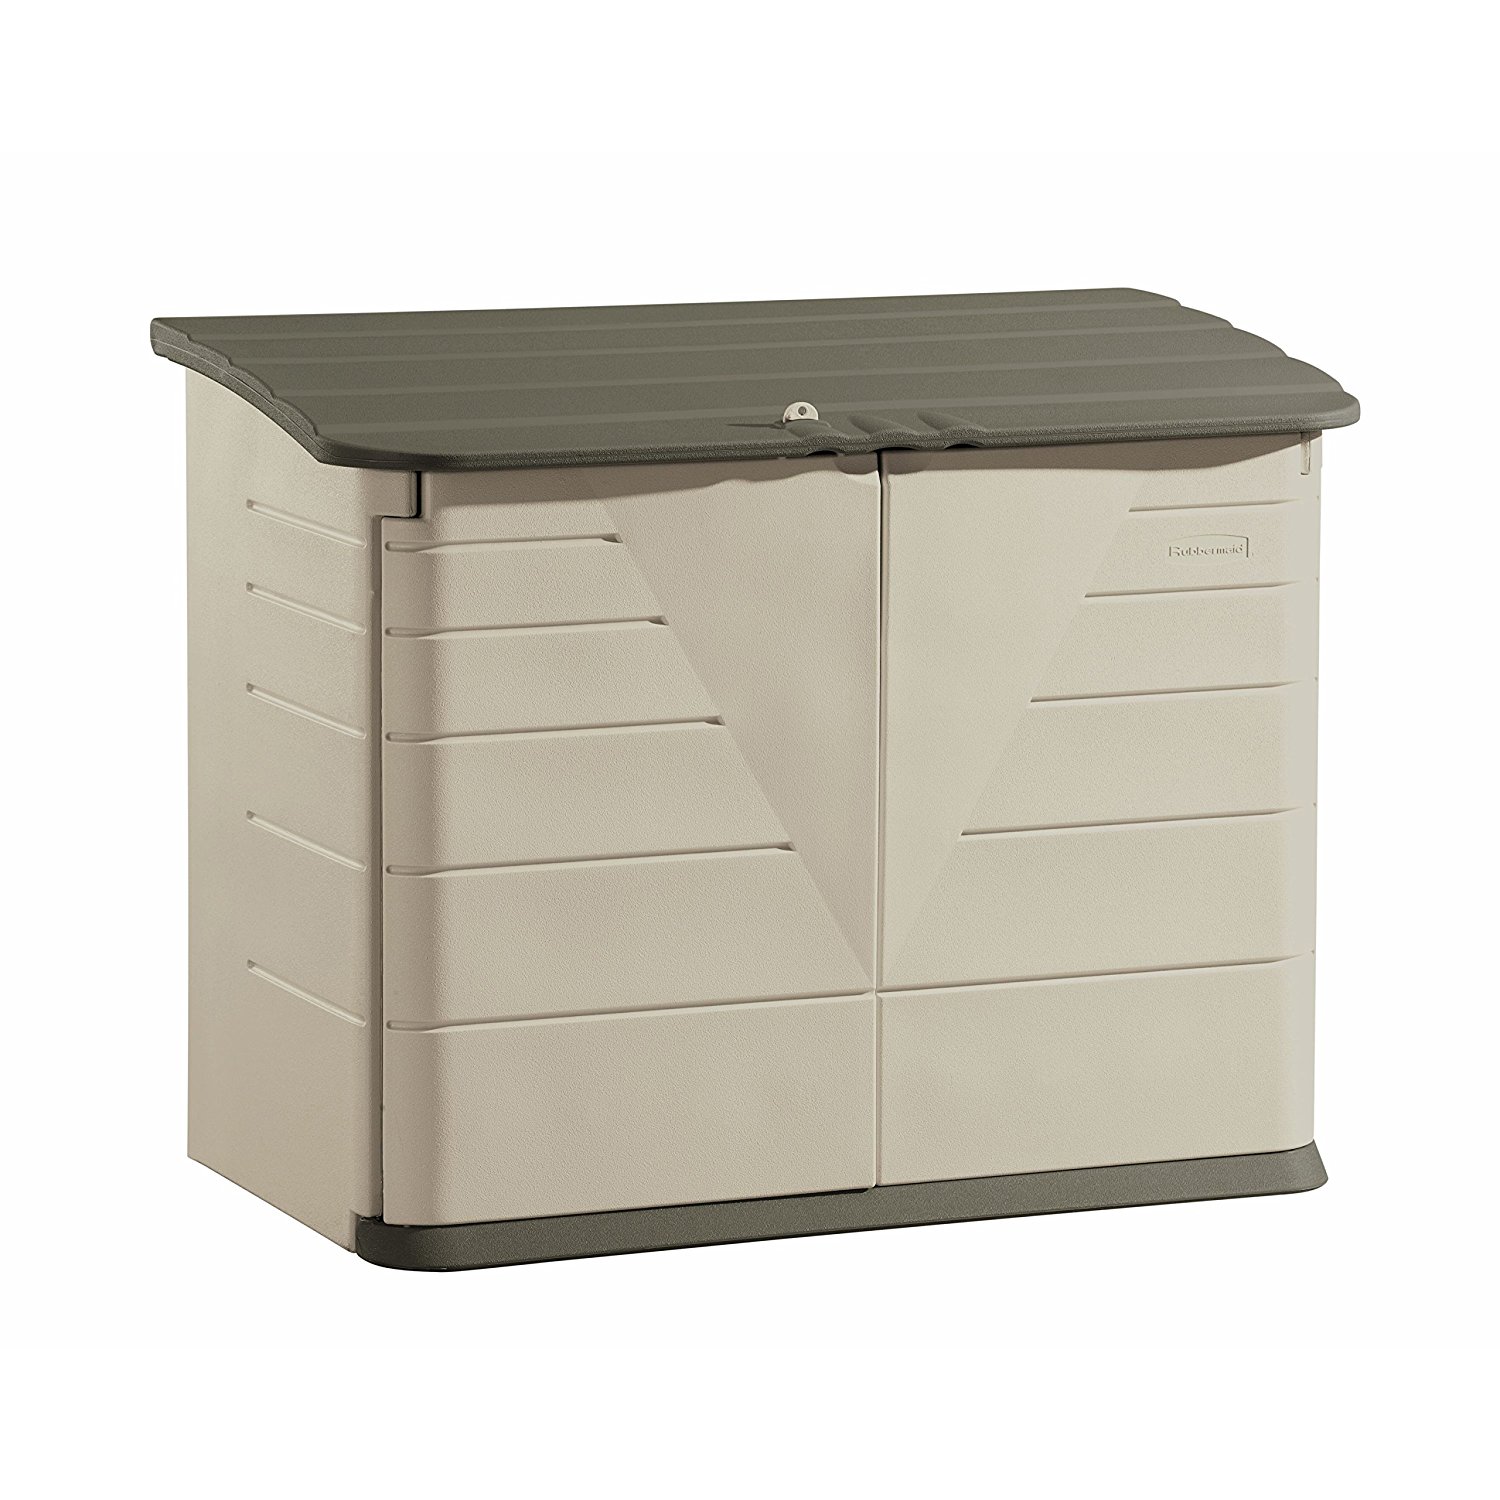 Rubbermaid Outdoor Storage Shed - Decor Ideas